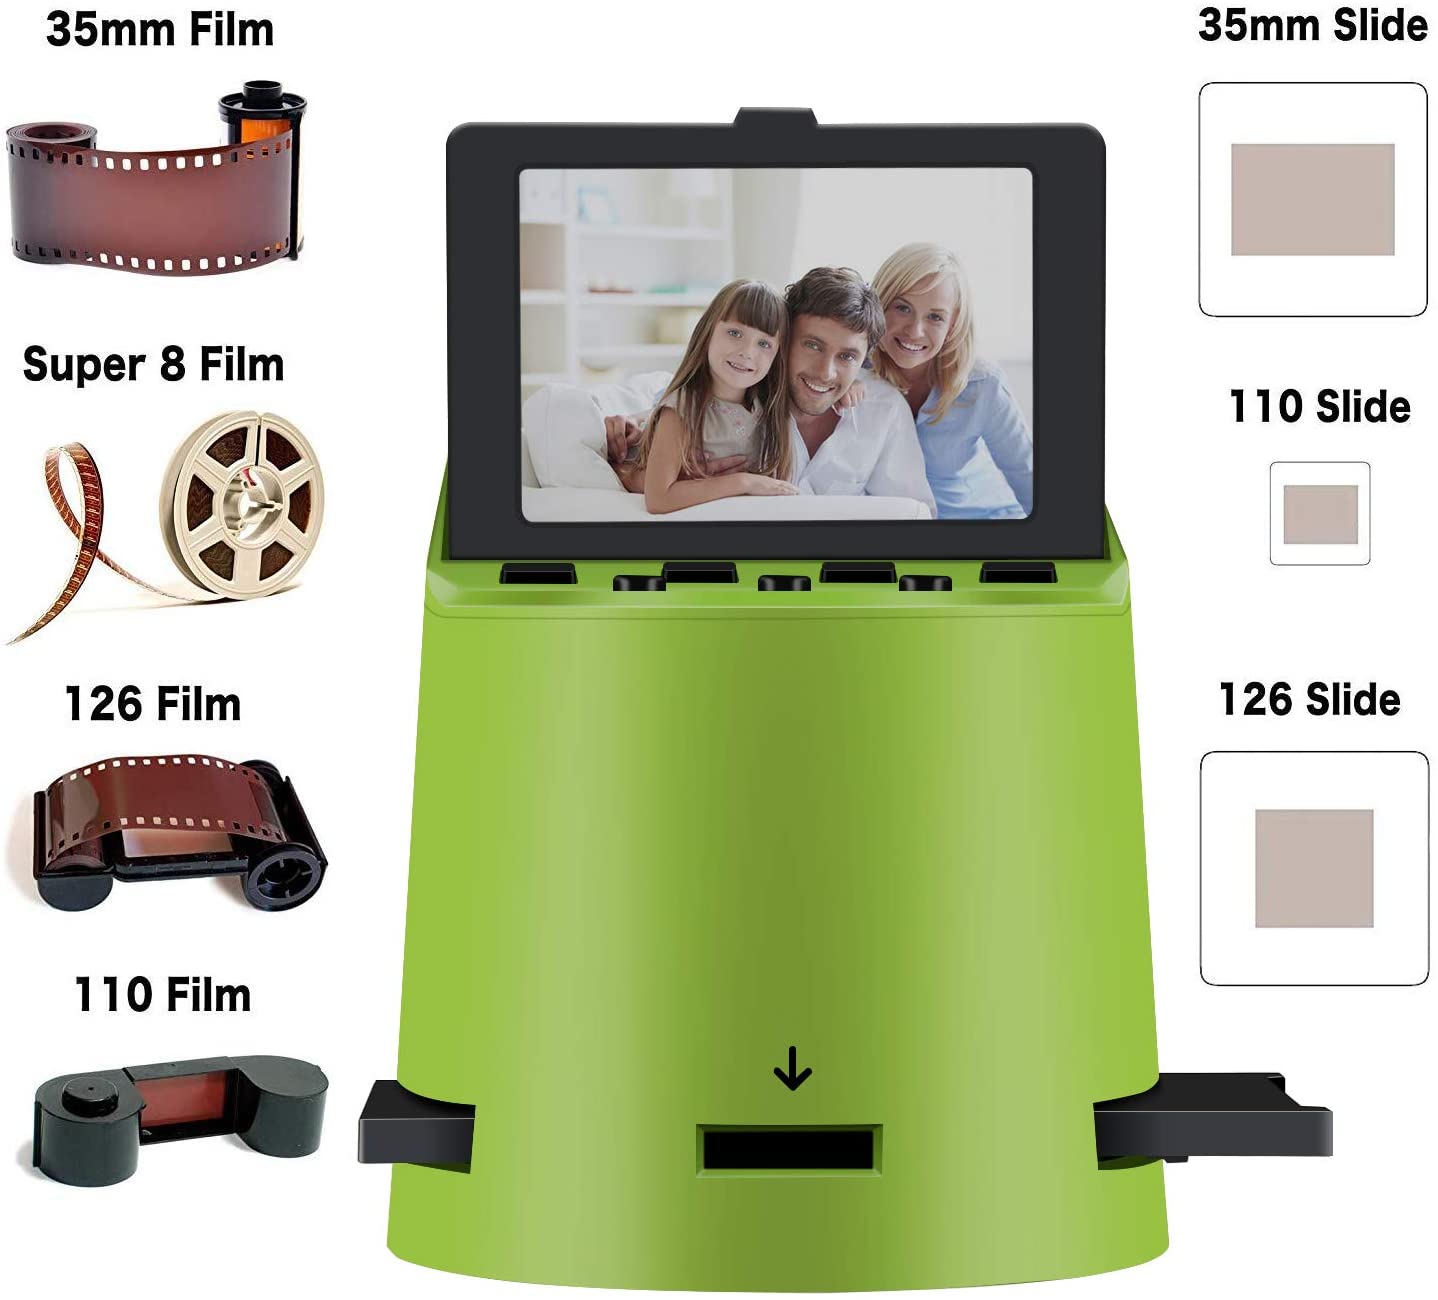 DIGITNOW Digital Film Scanner with 22MP, Converts 35mm, 126, 110, Super 8 Films, Slides, Negatives to JPEG, Tilt-Up 3.5" LCD, Transfer Pictures to Phones Via WiFi Connection, TV&HDMI, MAC and PC Co